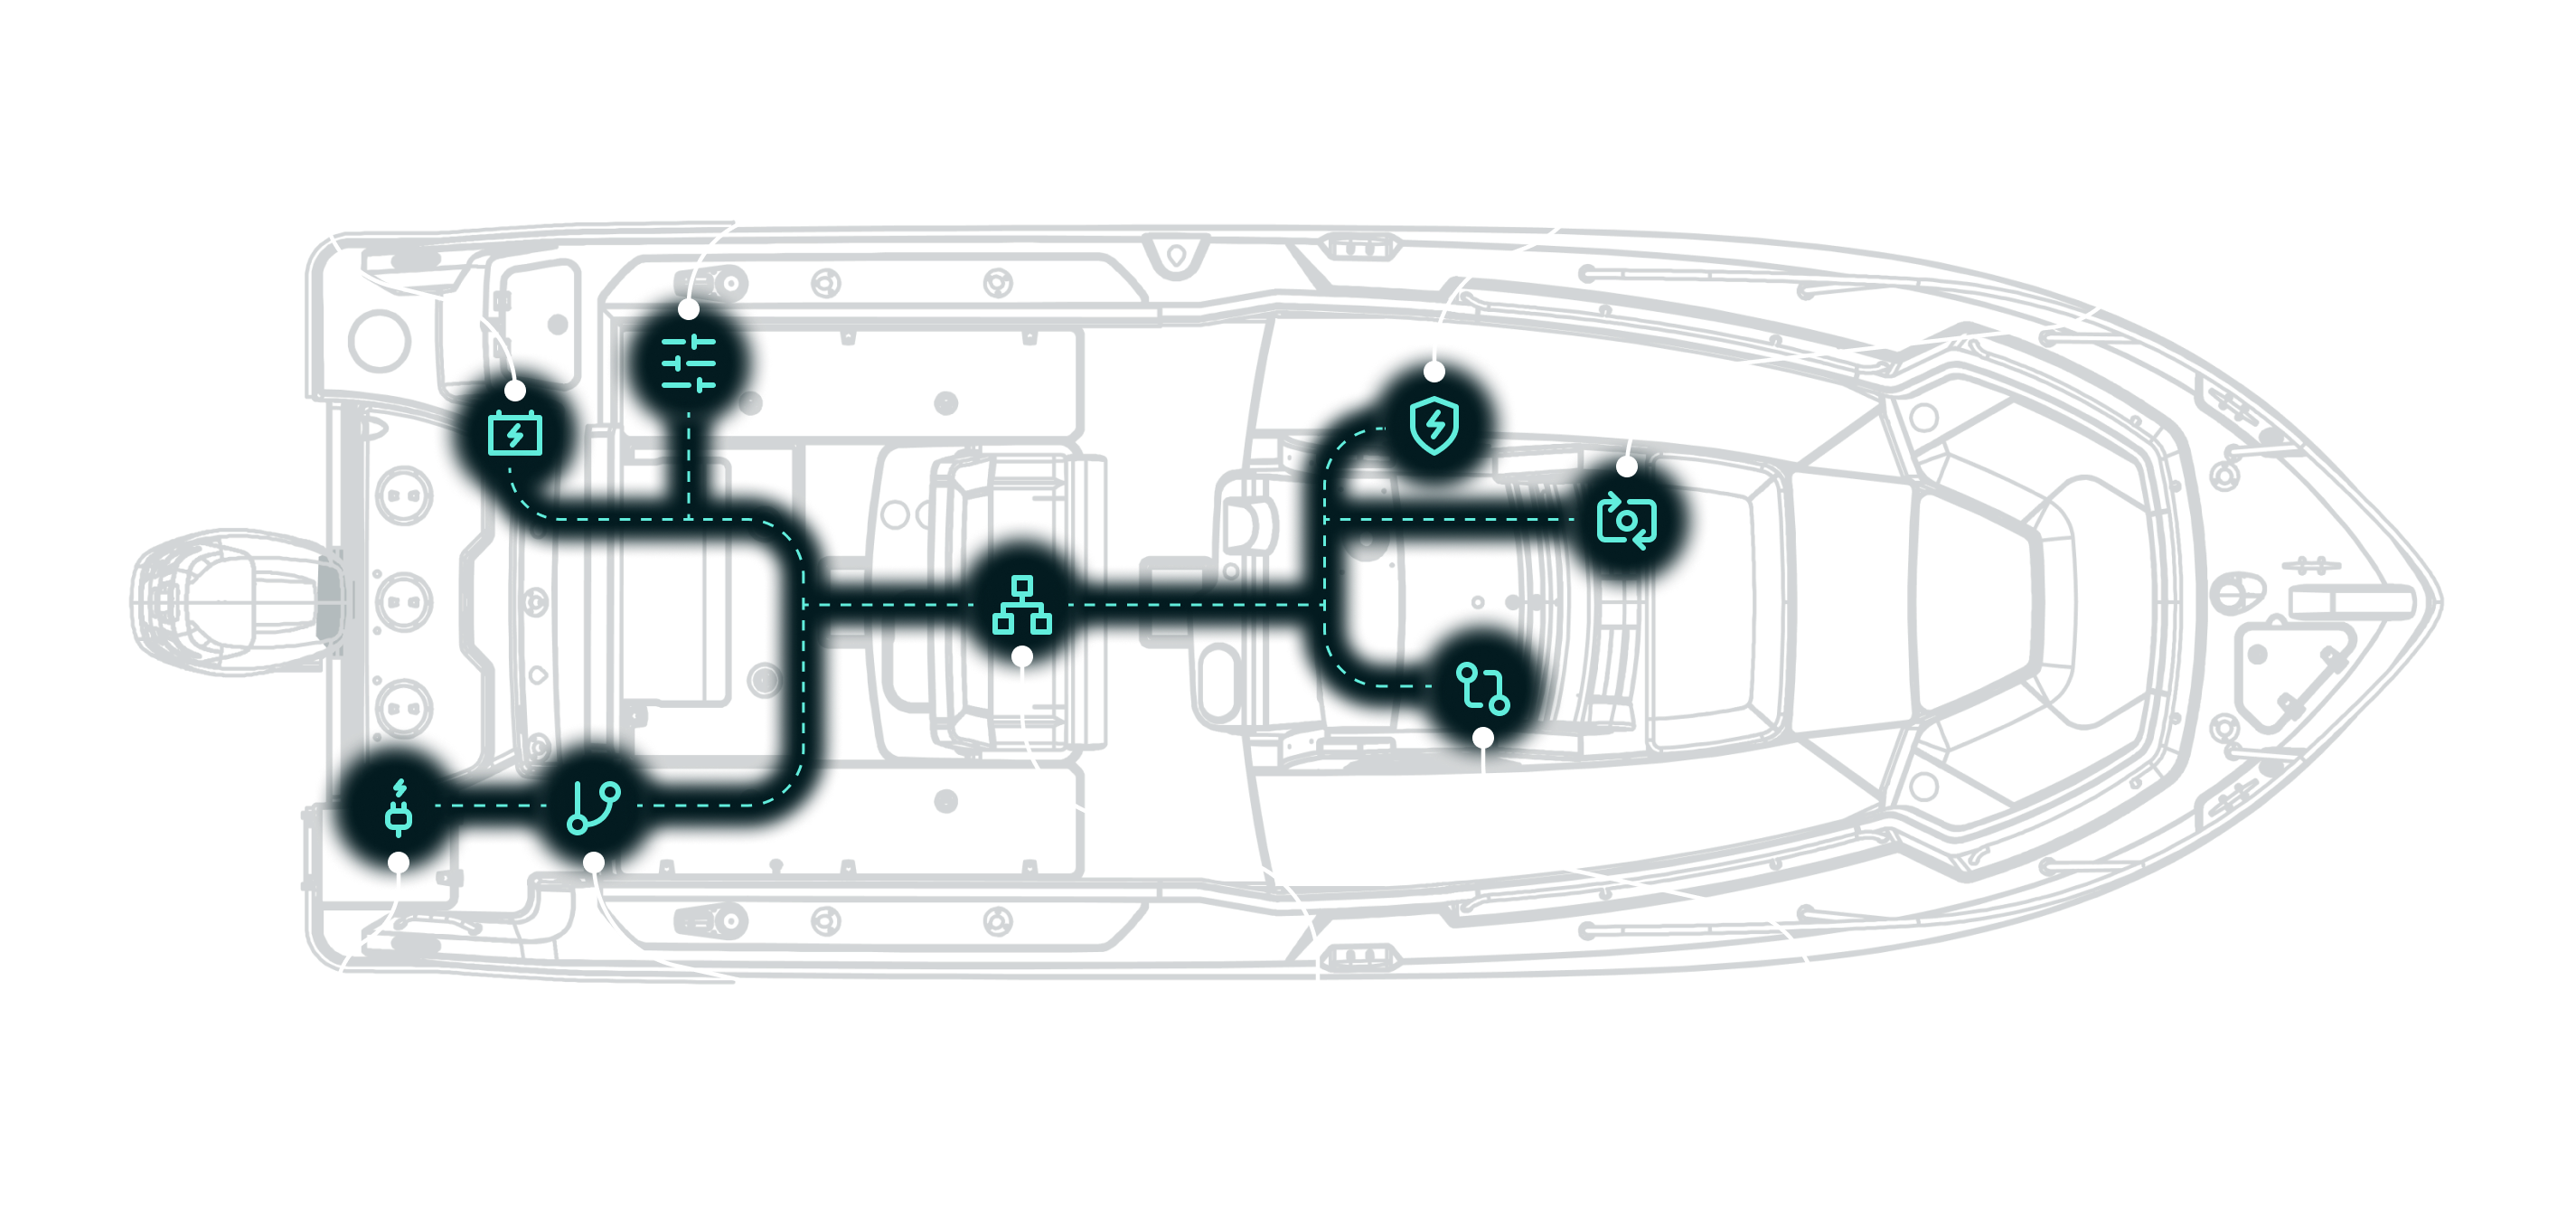 A diagram of a yacht with green icons showing the location of various power systems.